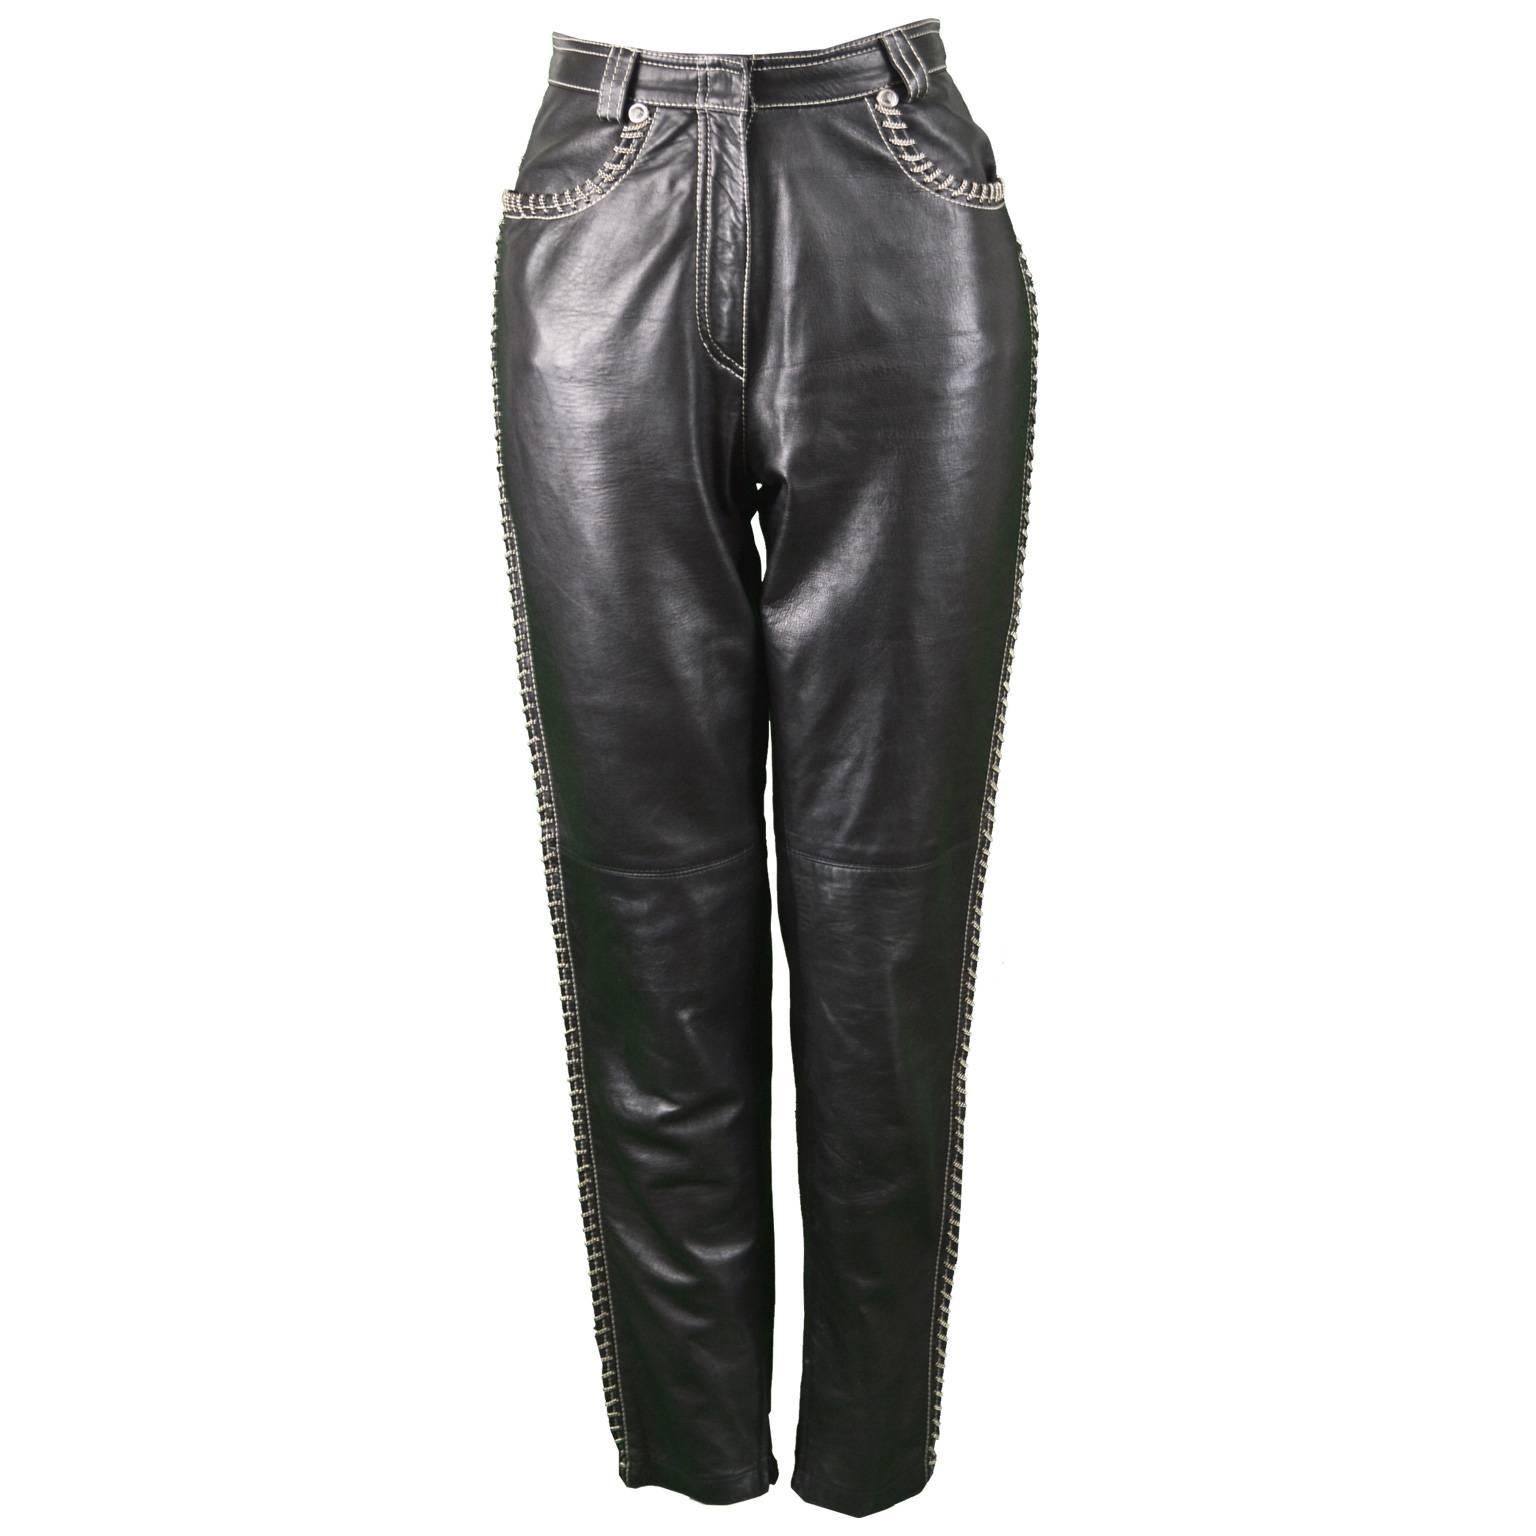 Gianni Versace Vintage Chain Embroidered Black Leather Pants, 1990s